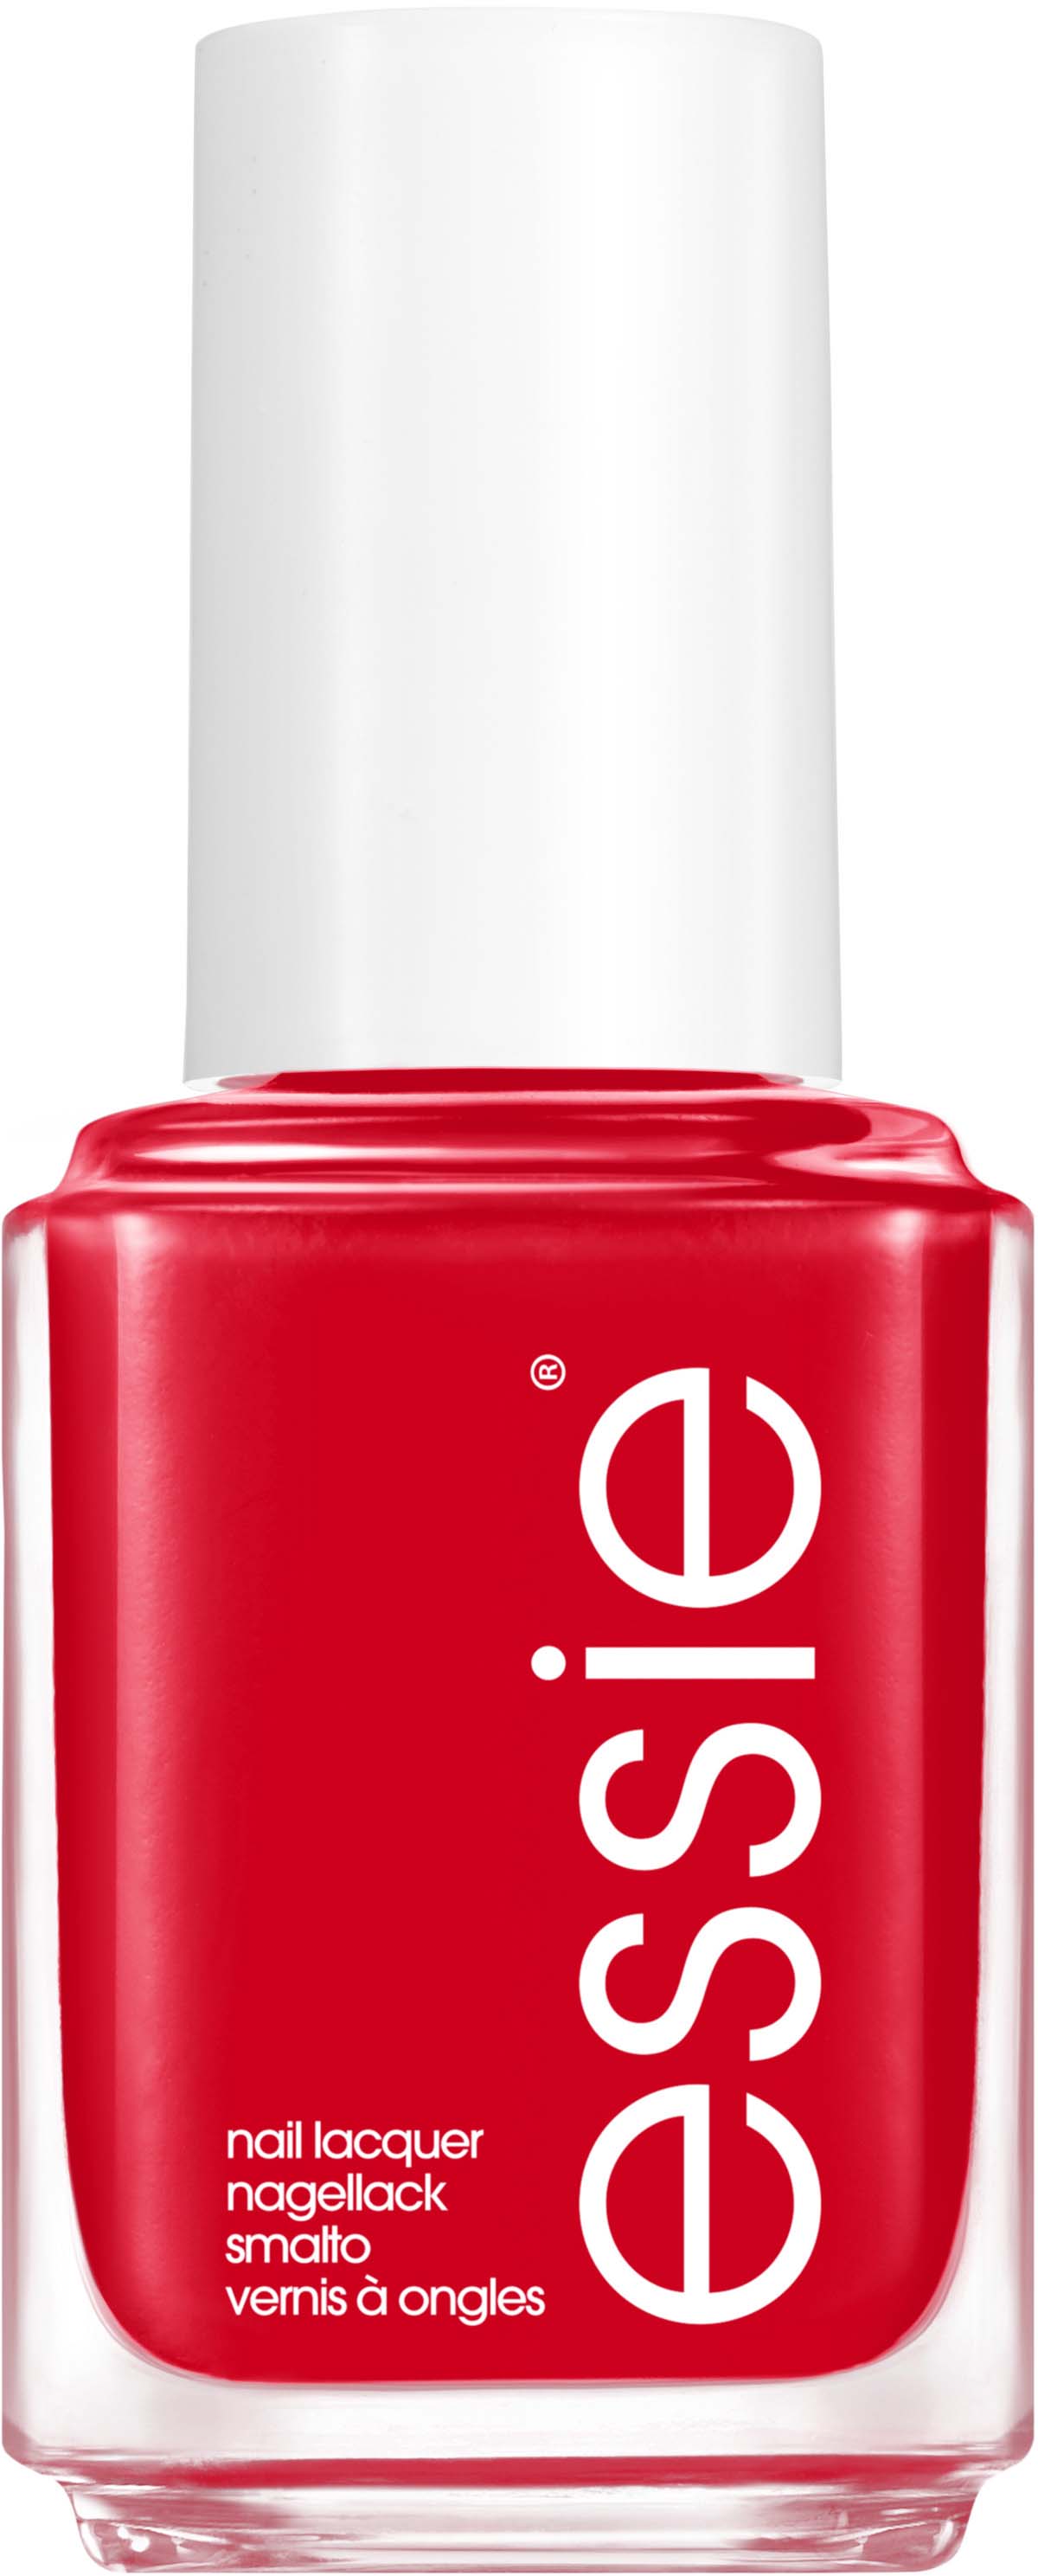 Essie Russian 61 Lacquer Roulette Nail